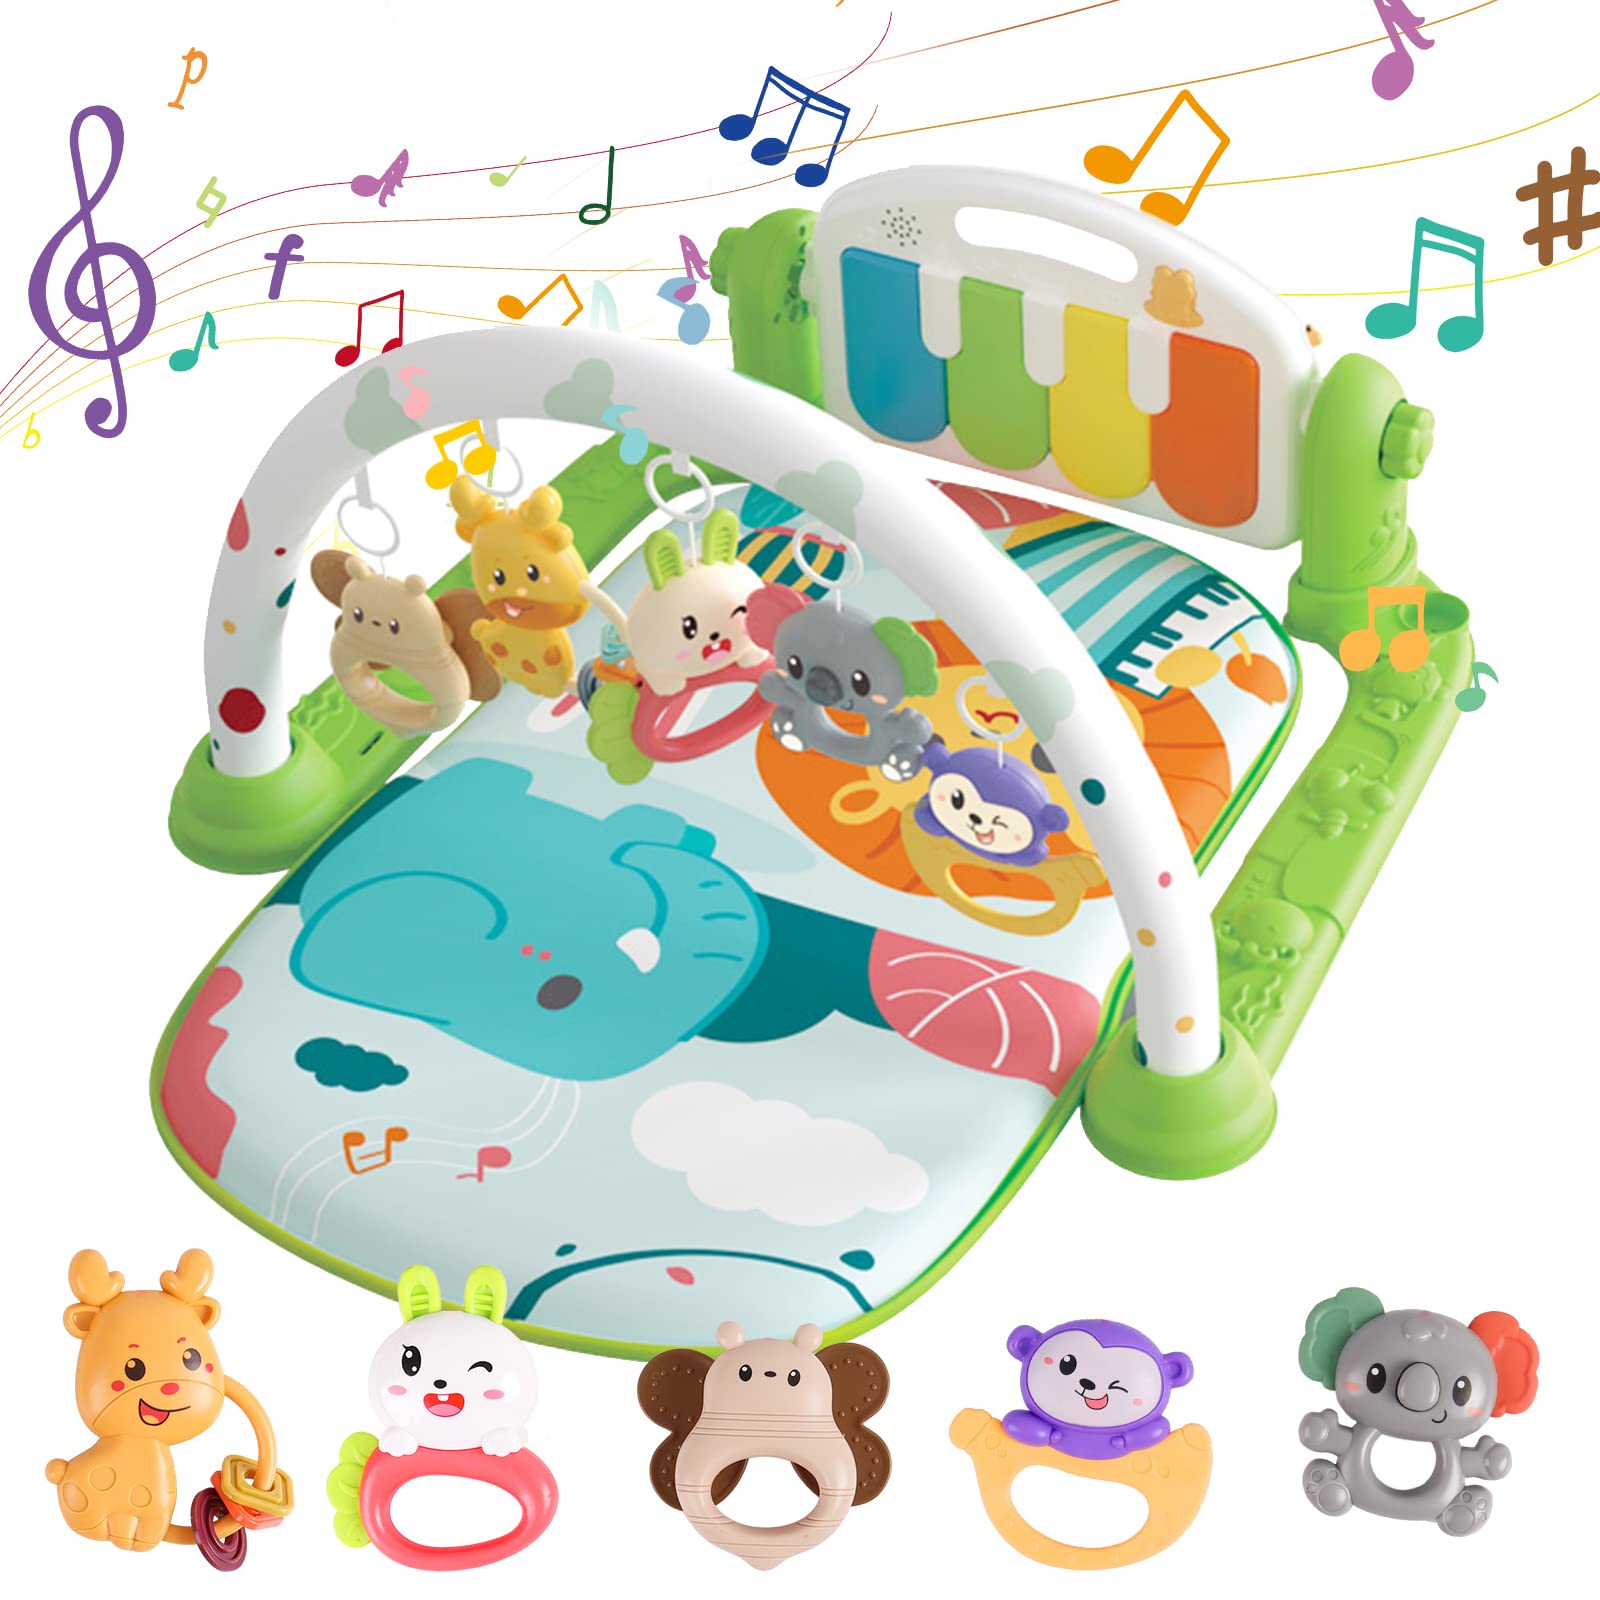 3 in 1 Baby Activity Play Mat Infant Play Gym Kids Musical Play Crawling Mat with Hanging Toys and Lights Best Gift for Baby Boy and Girl, Green - image 4 of 9